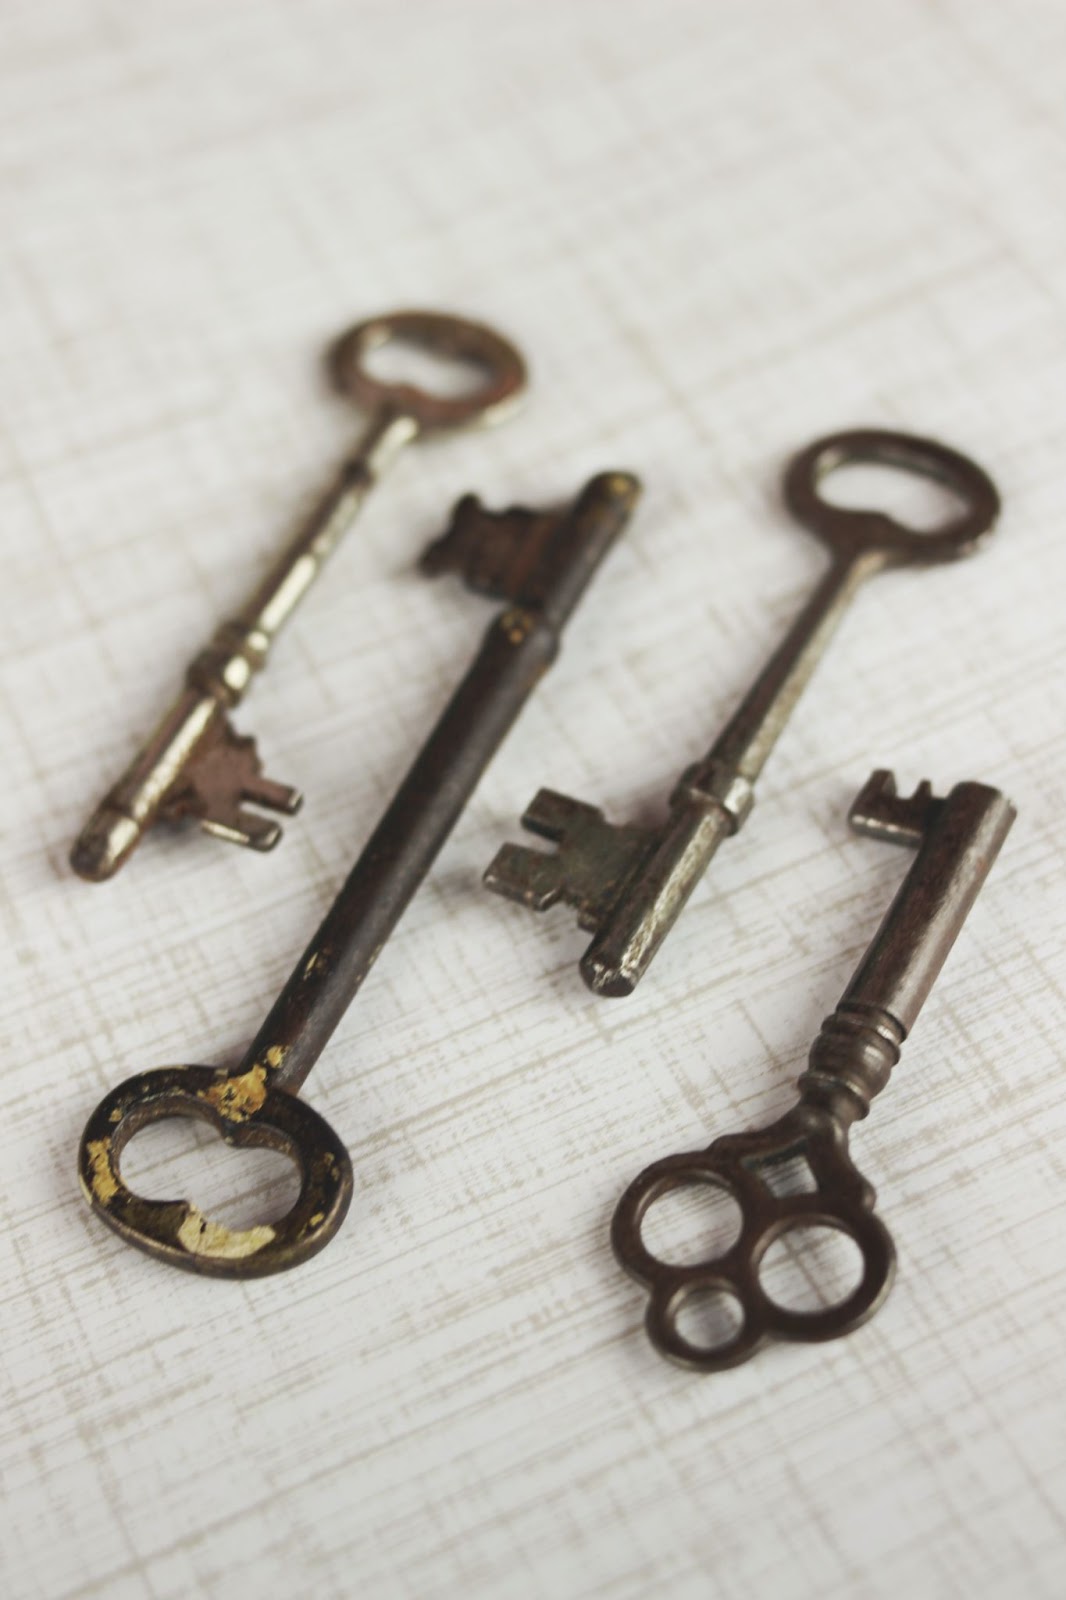 four antique keys lying on a crosshatched background.